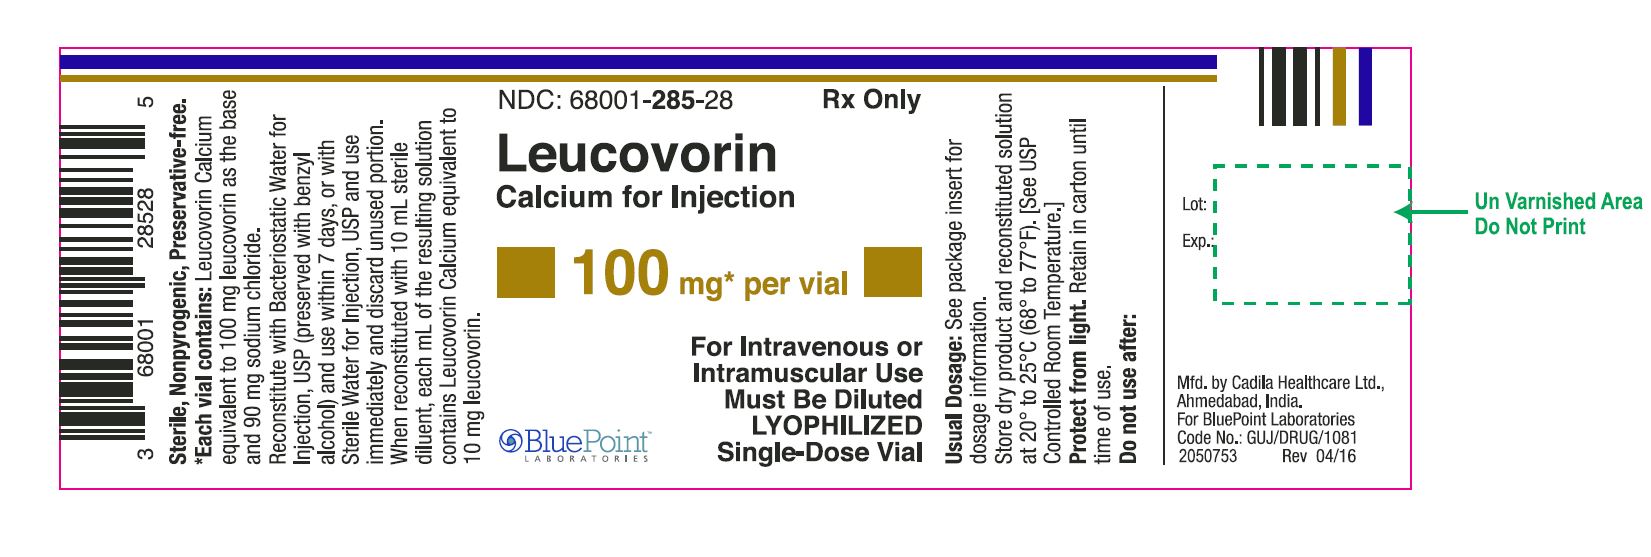 Leucovorin Calcium for Injection 100mg vial label